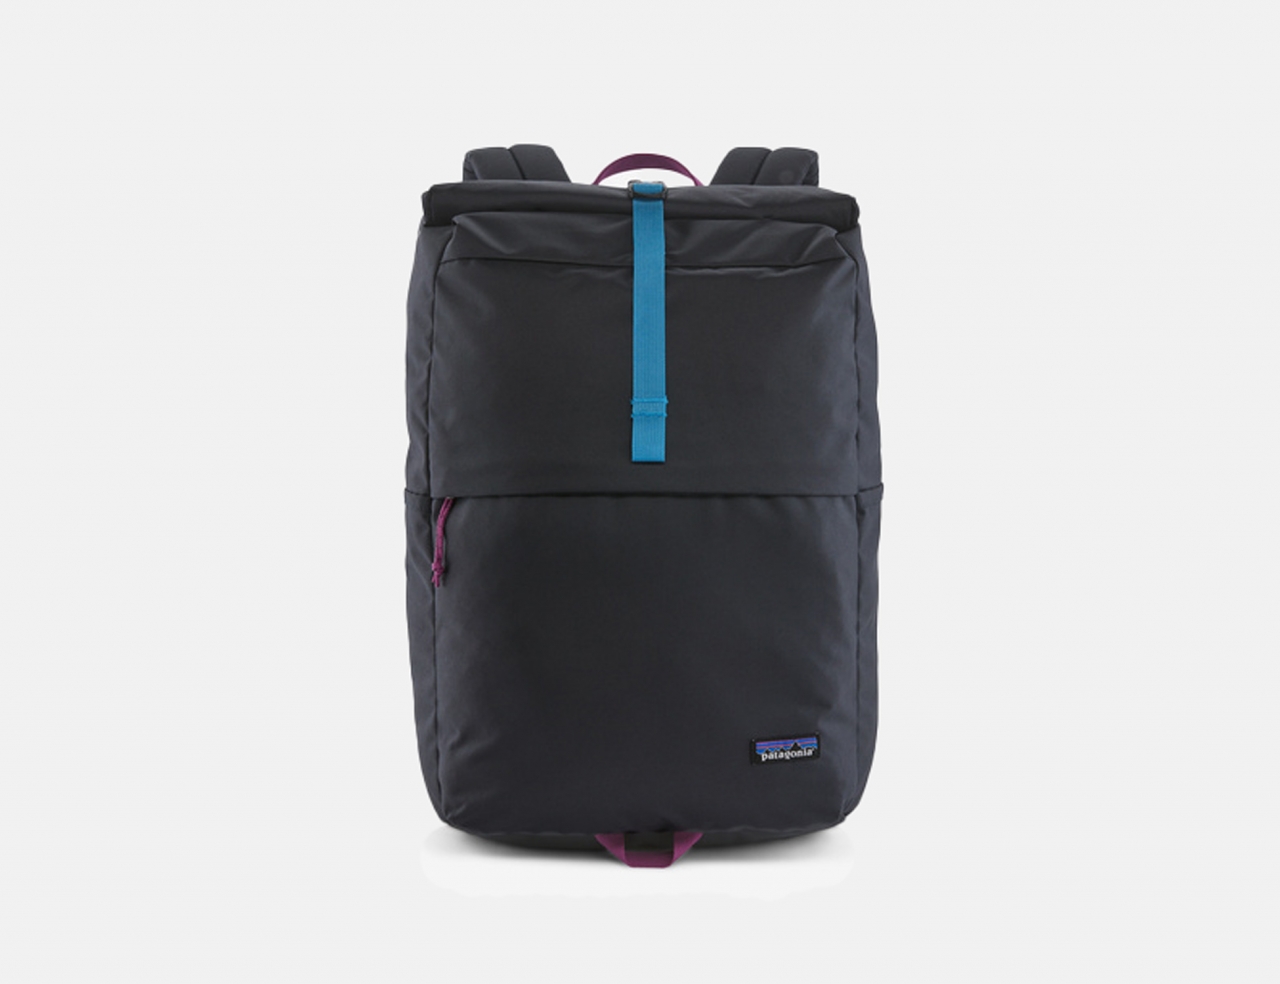 Patagonia Fieldsmith Roll Top Pack - Pitch Blue